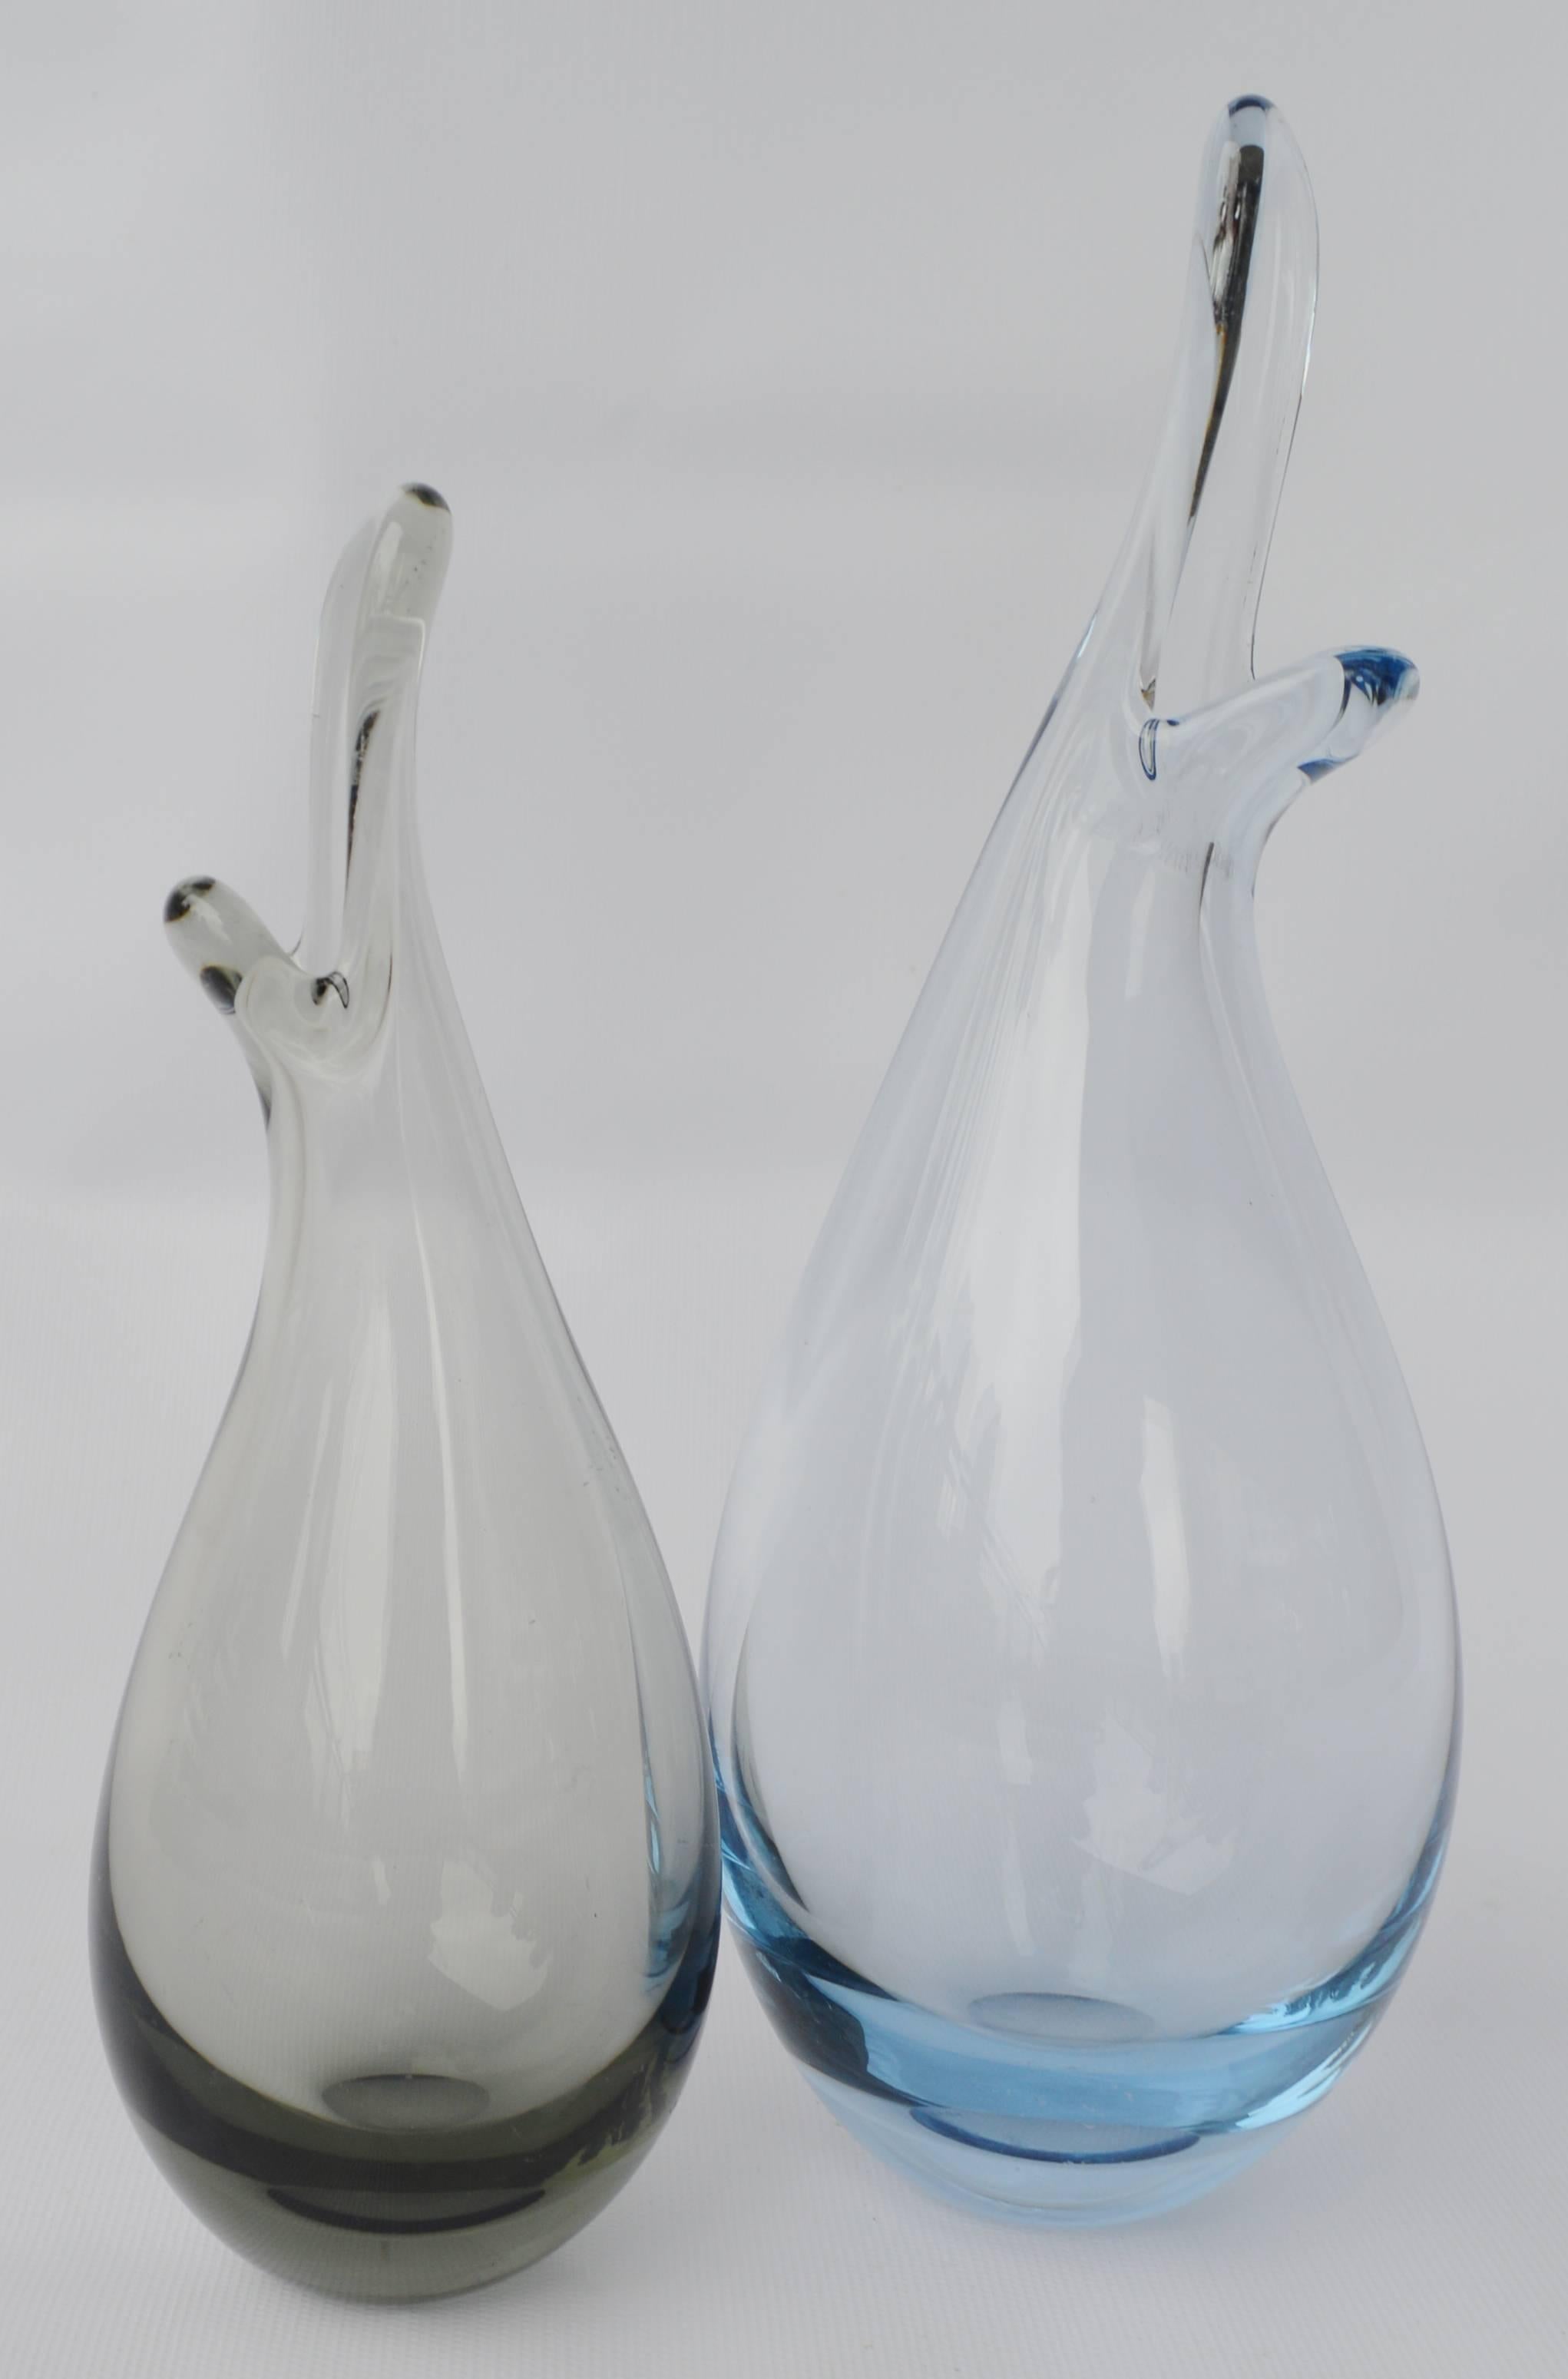 Pair of Per Lutkin Duckling Vases for Holmegaard, Denmark, Blown Glass In Excellent Condition For Sale In New Westminster, British Columbia